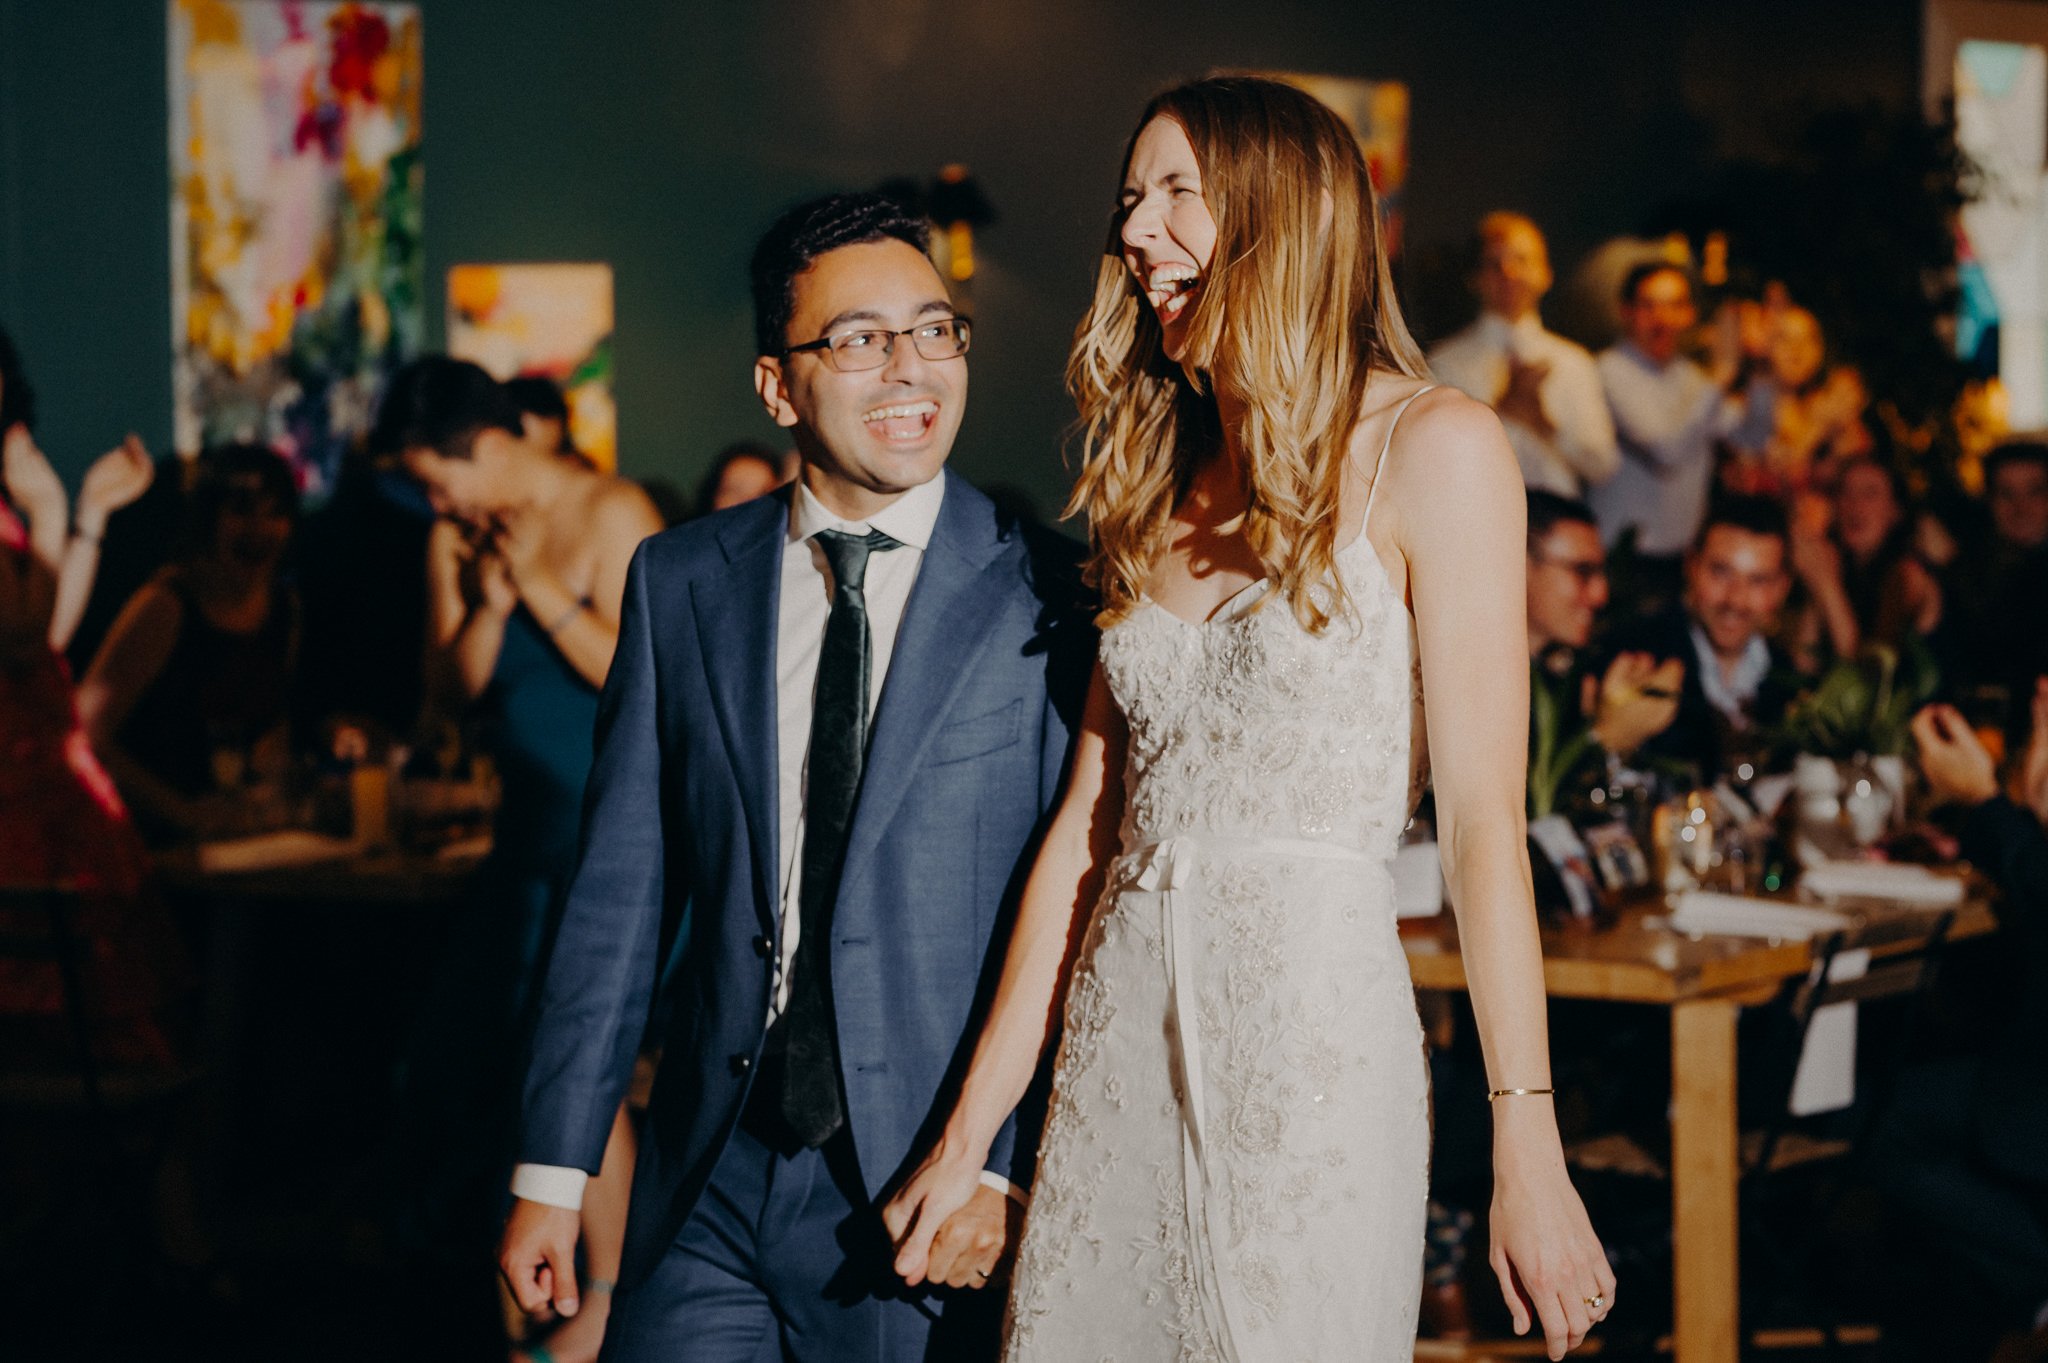 the fig house wedding - queer wedding photographers in los angeles - itlaphoto.com-116.jpg